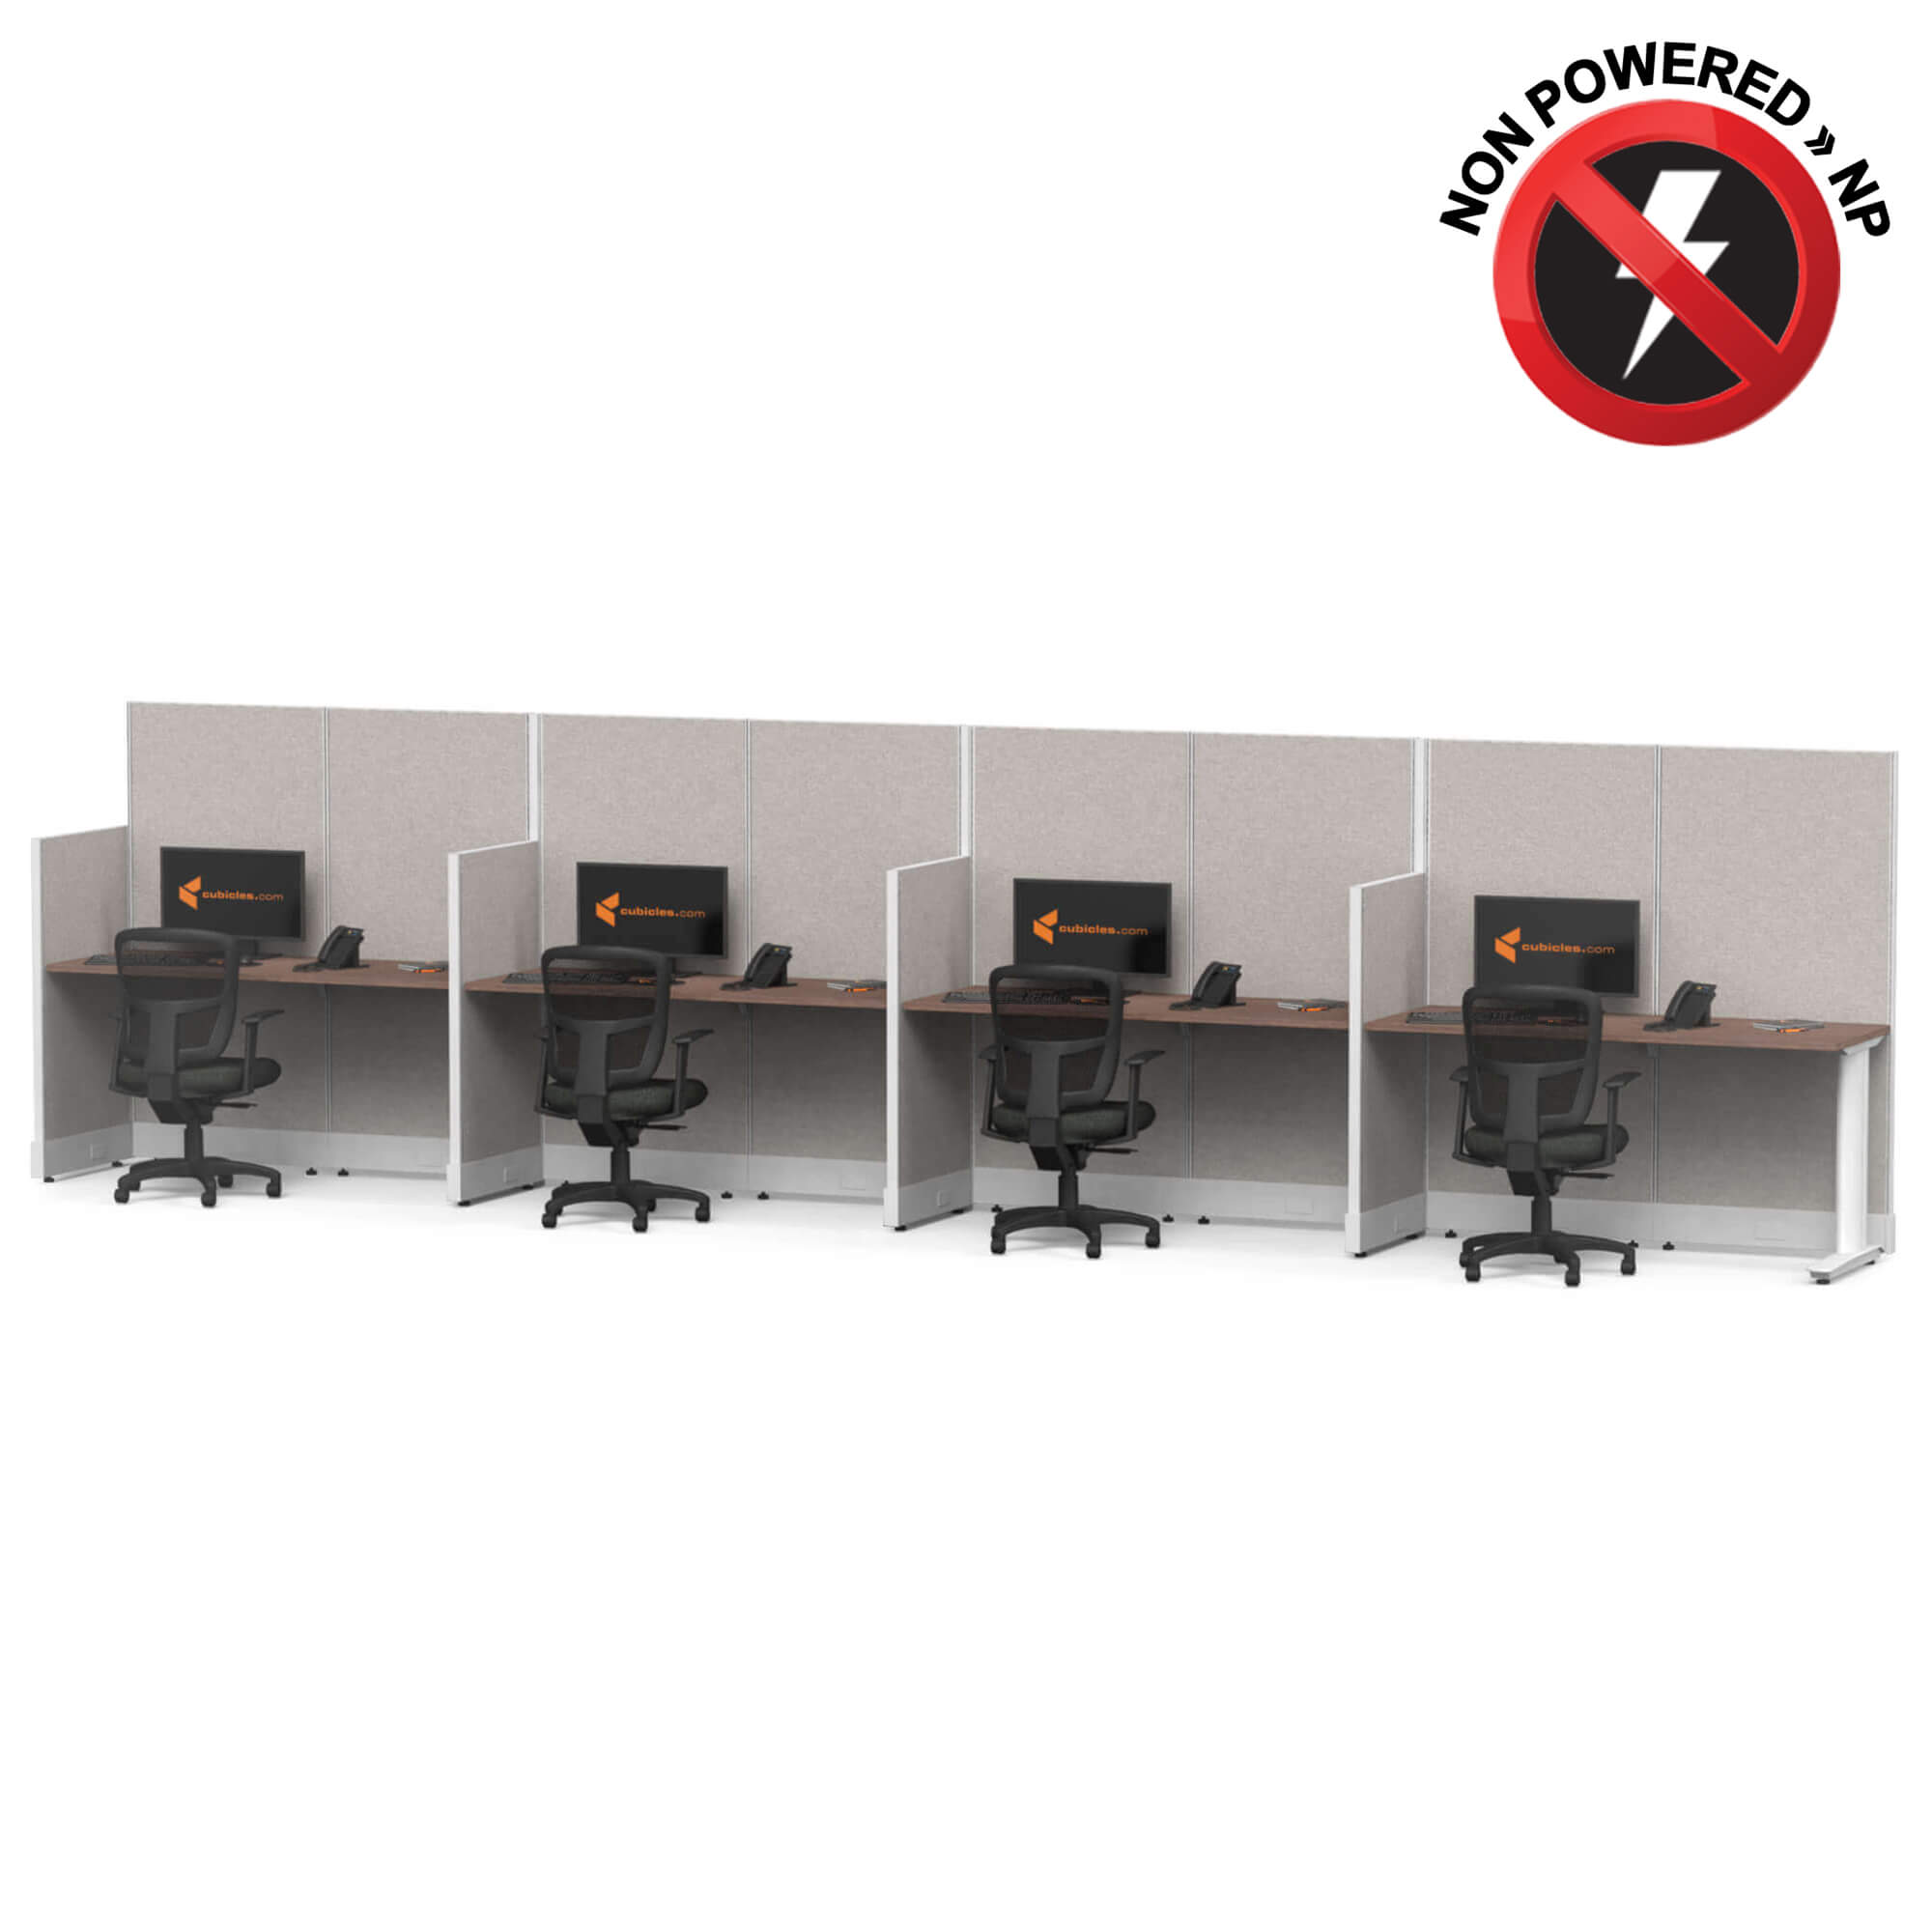 Cubicle desk straight workstation 4pack inline non powered sign 1 2